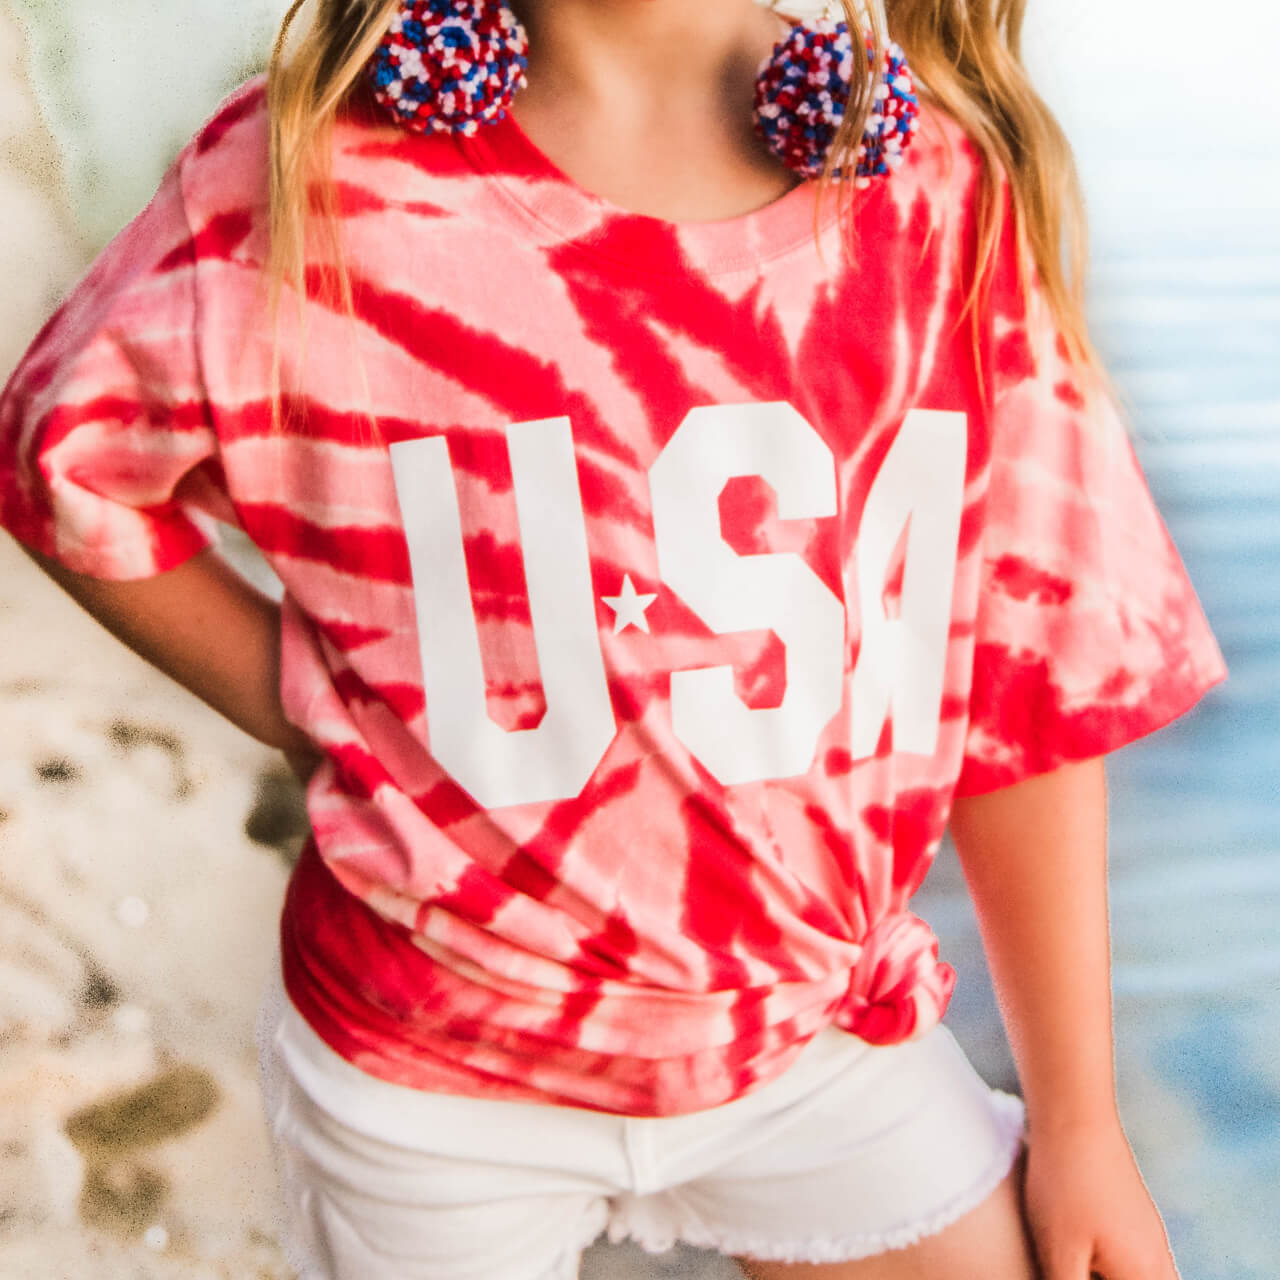 red white and blue t shirt